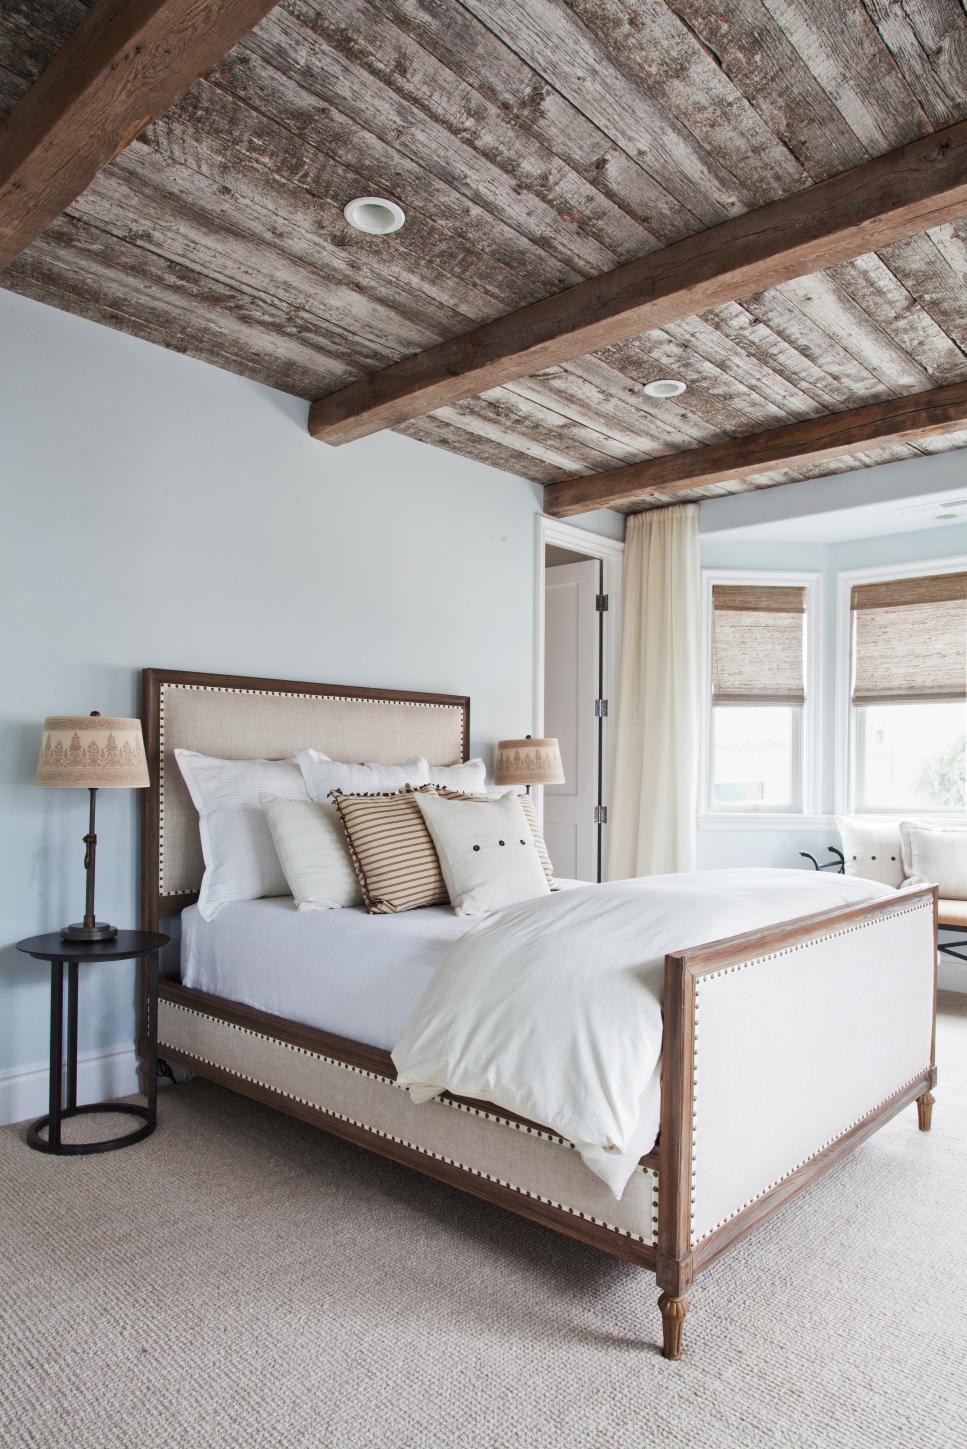 Country Bedroom With Gorgeous Reclaimed Wood Ceiling | HGTV